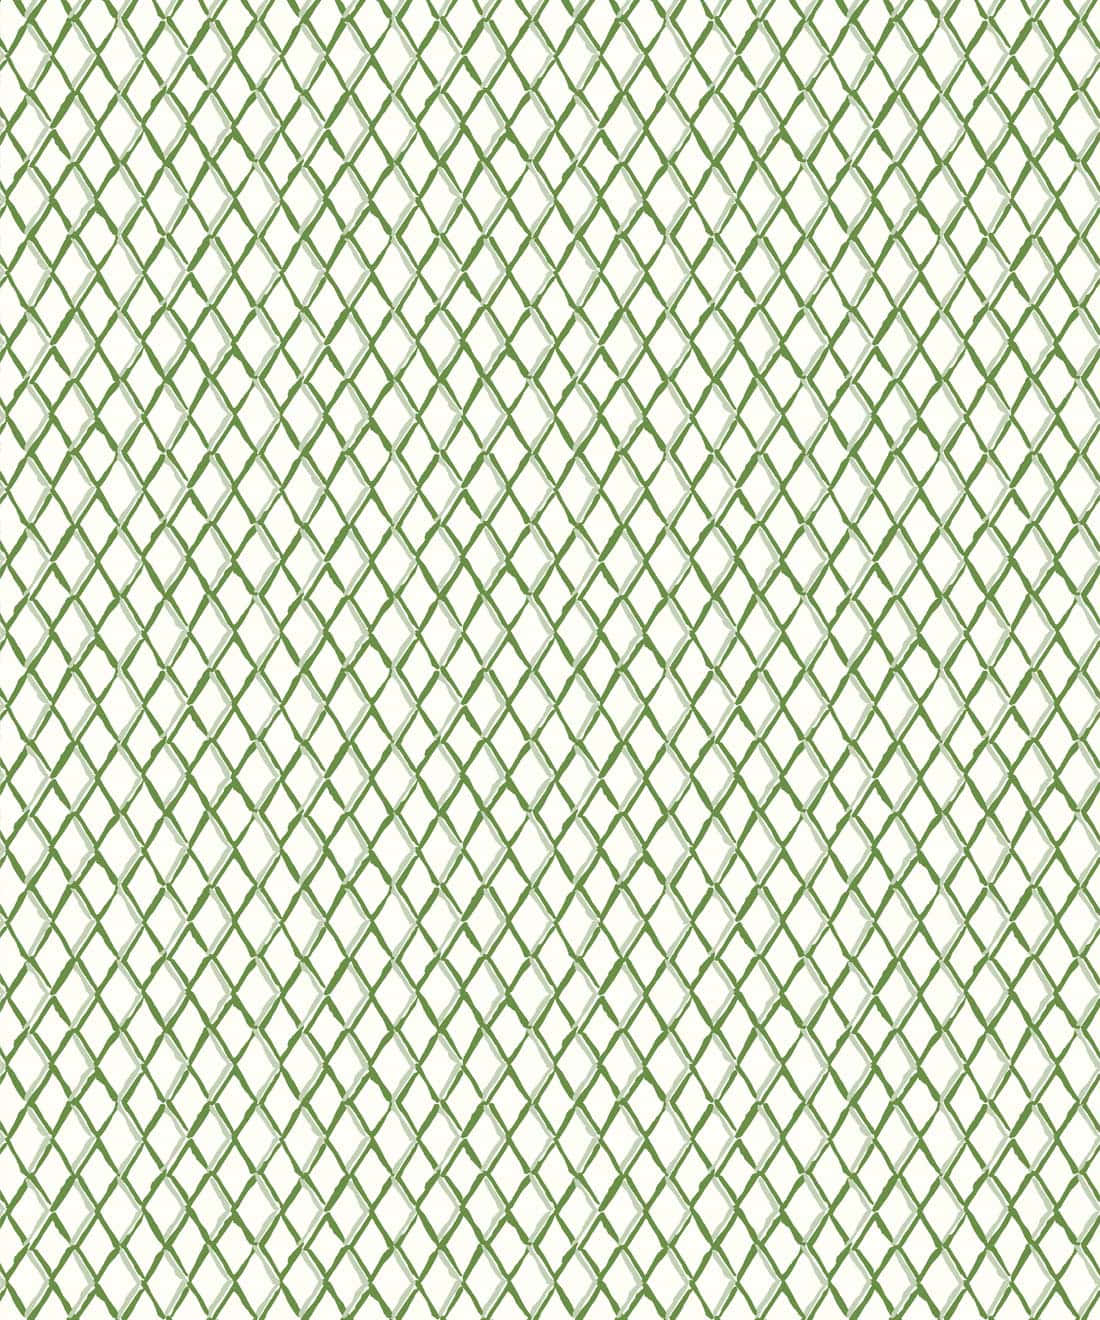 Abstract Green Wire Mesh Artwork